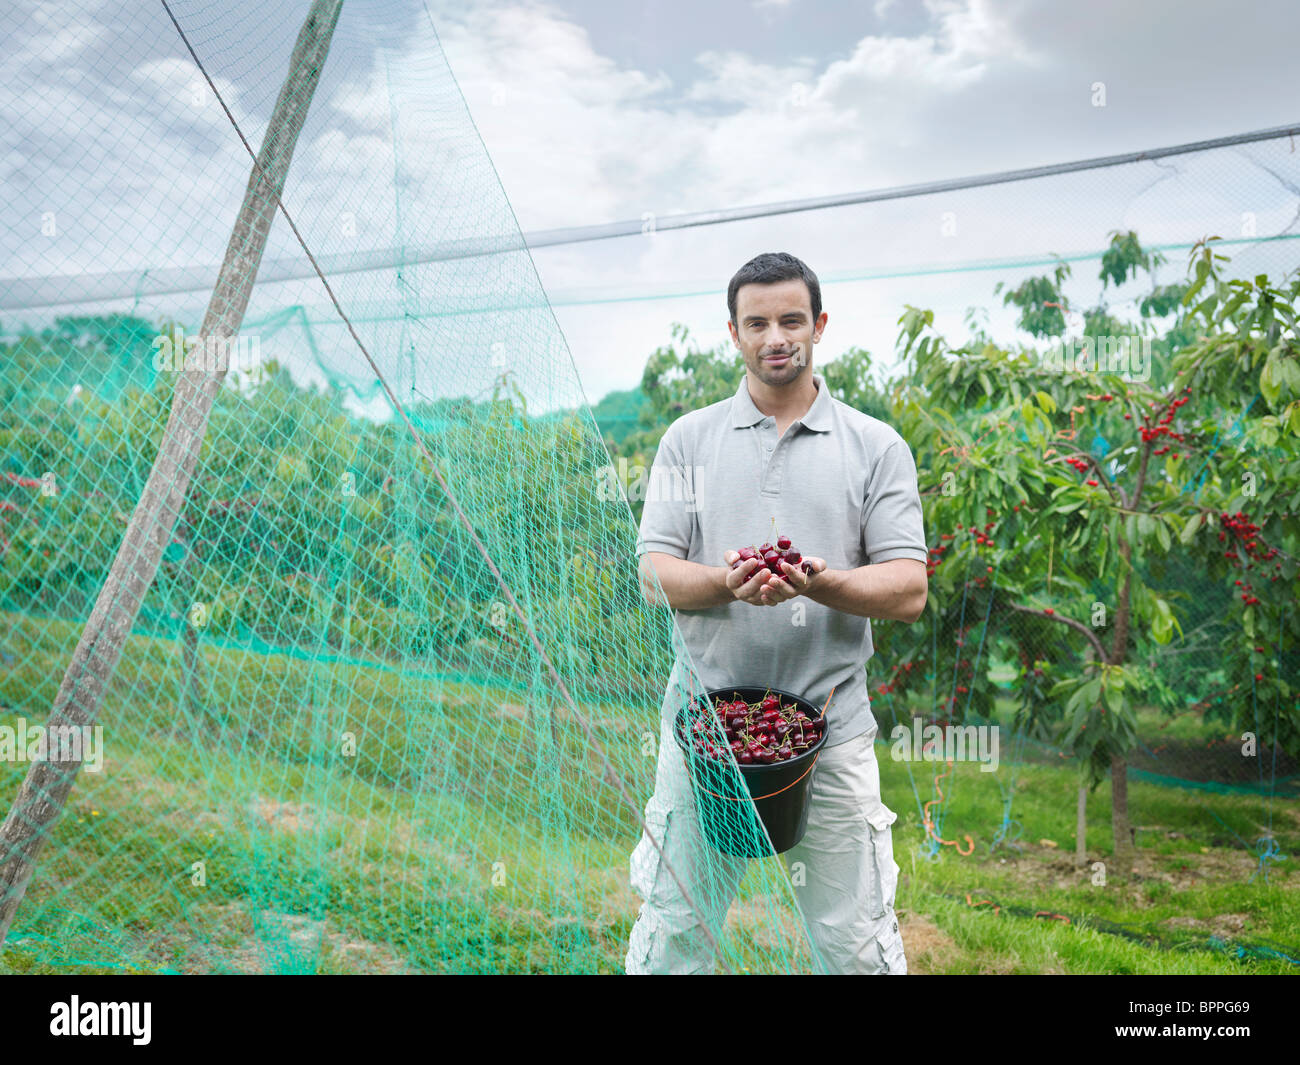 Man with bucket of cherries in orchard Stock Photo